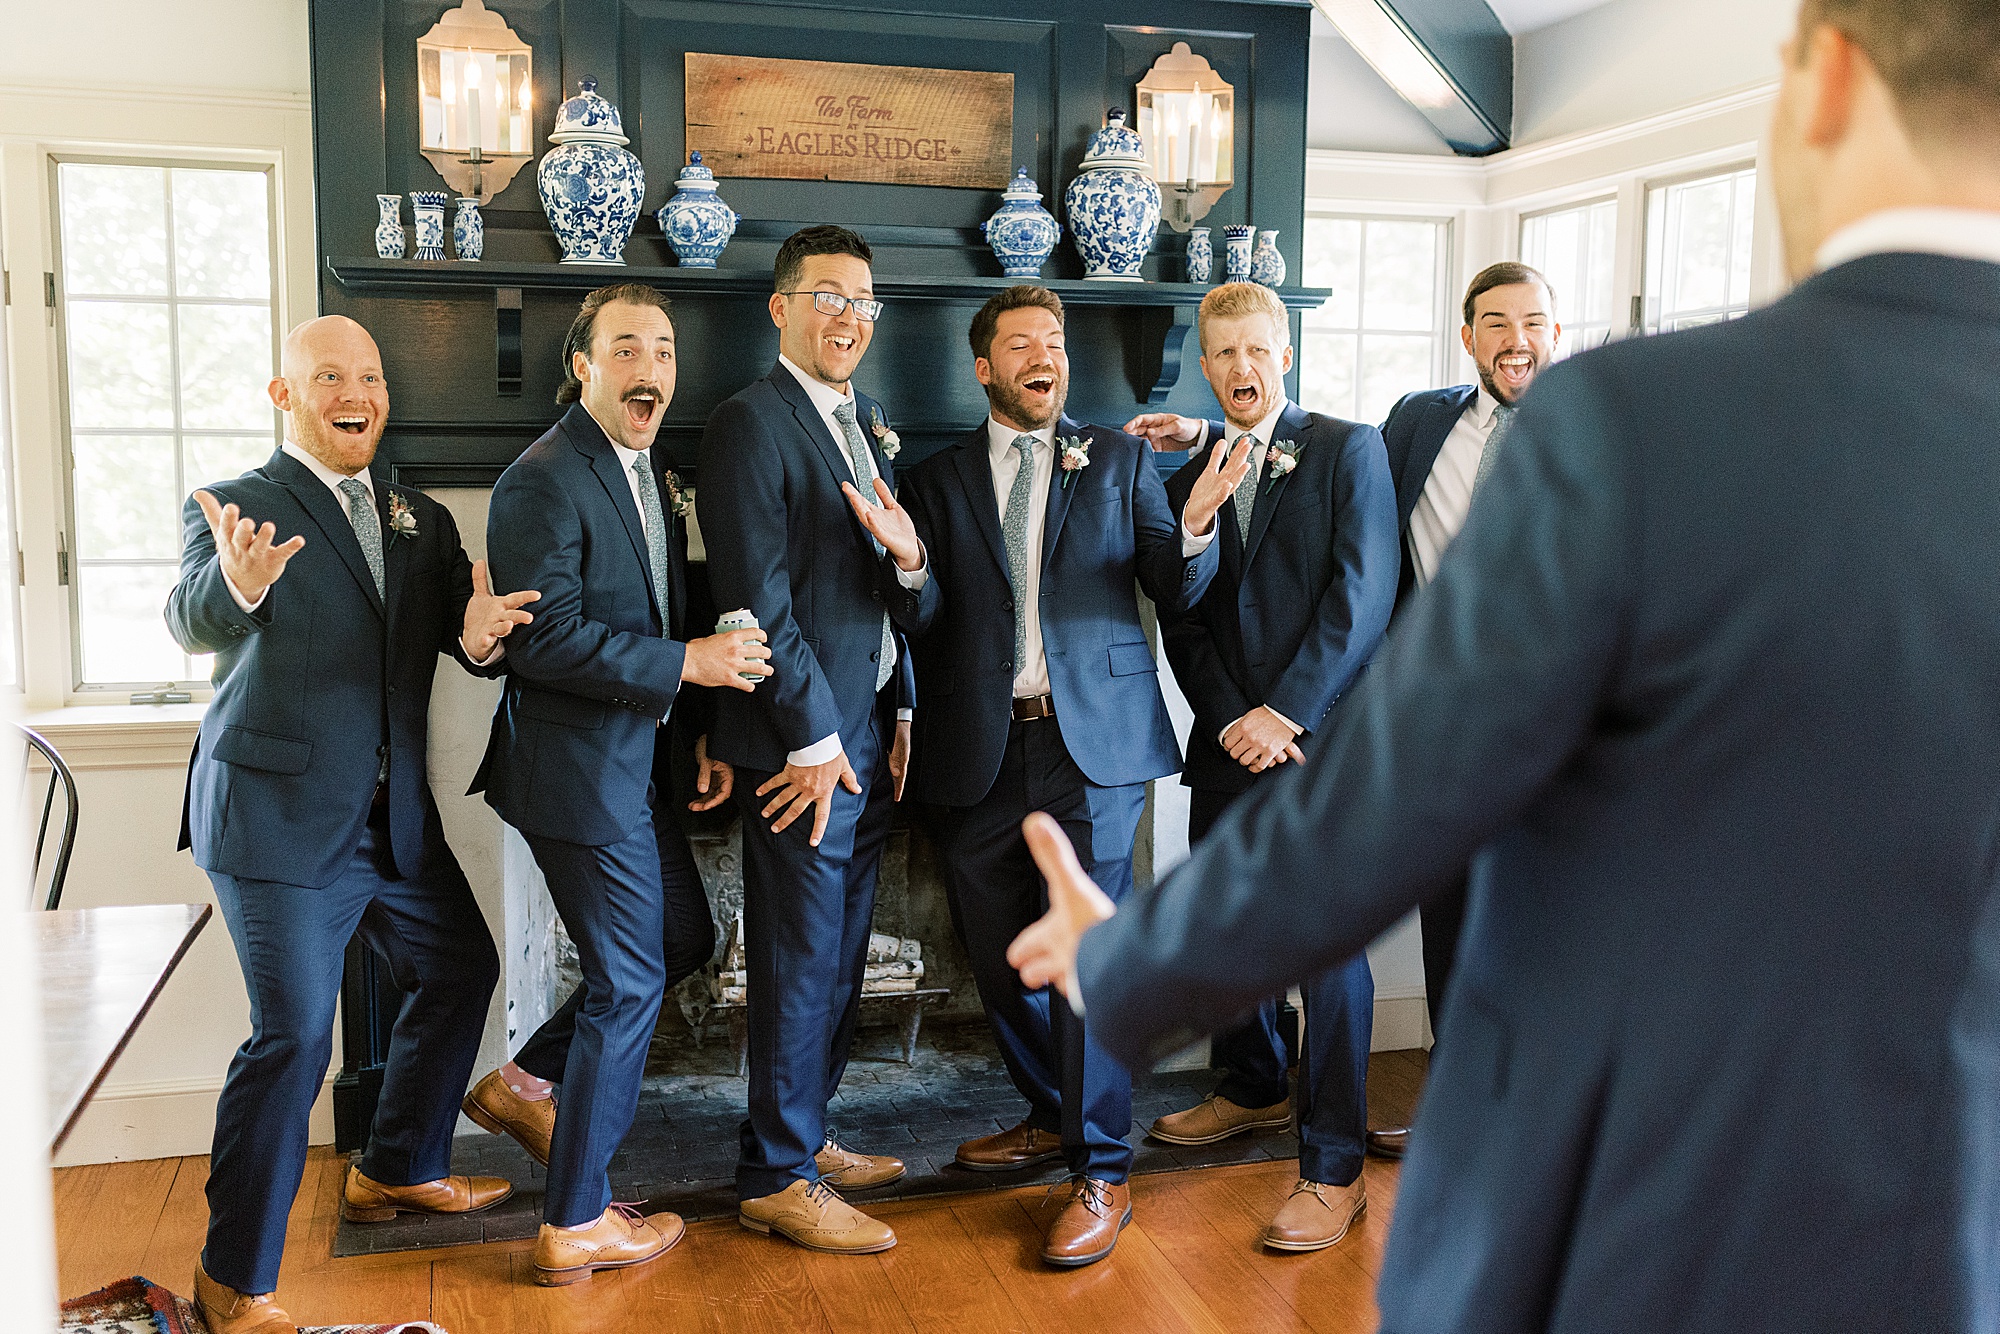 groomsmen smile and cheer during first look with groom at The Farm at Eagles Ridge 